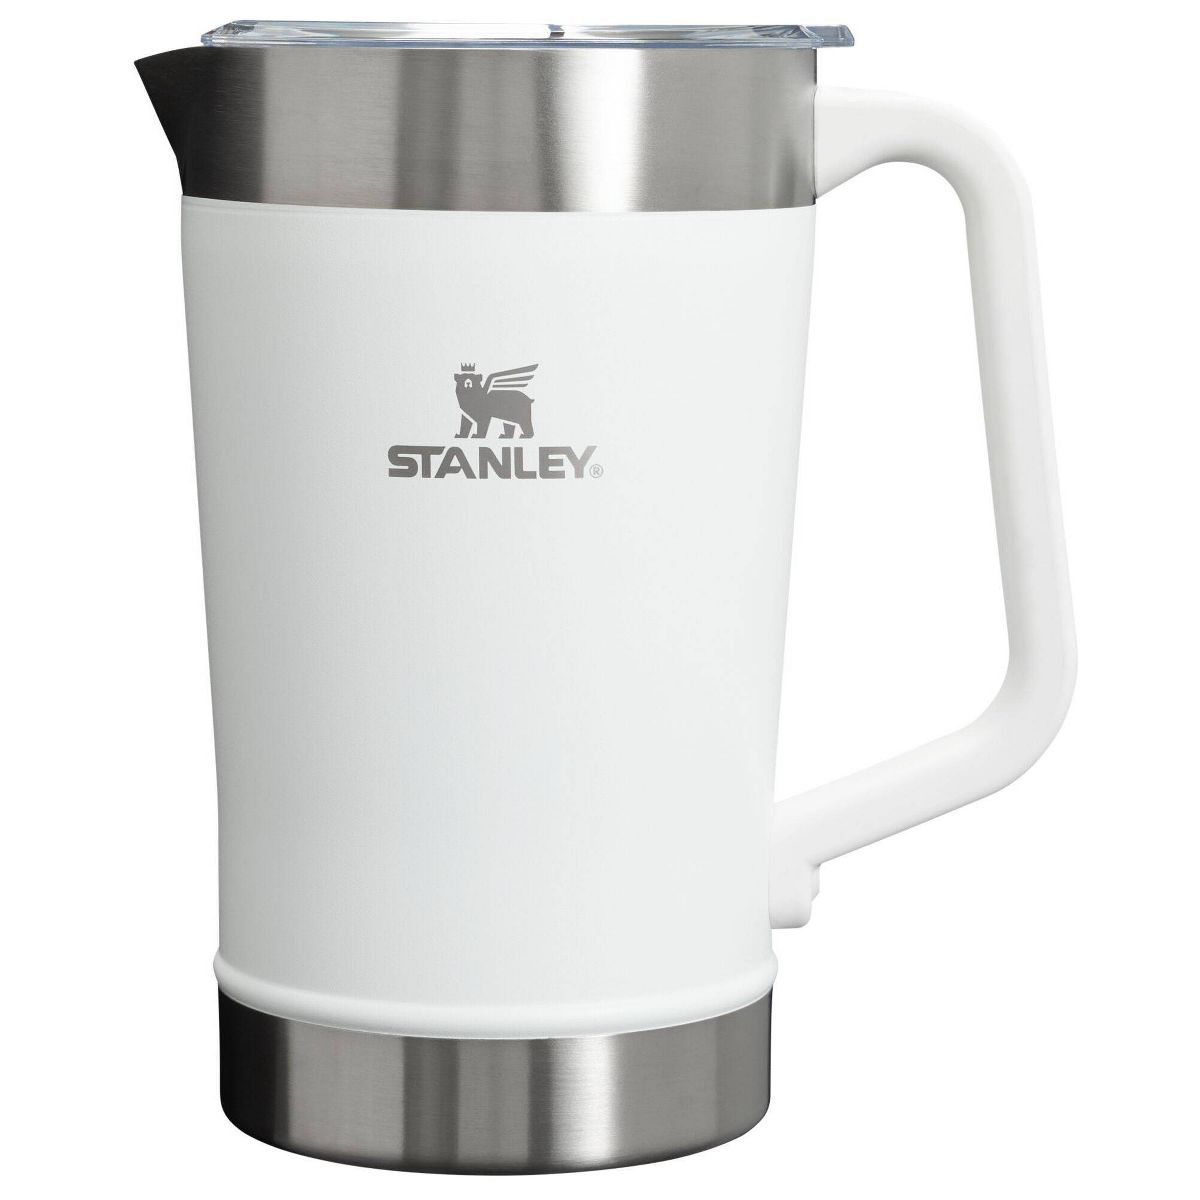 Stanley 64 oz Stainless Steel Stay-Chill Pitcher | Target